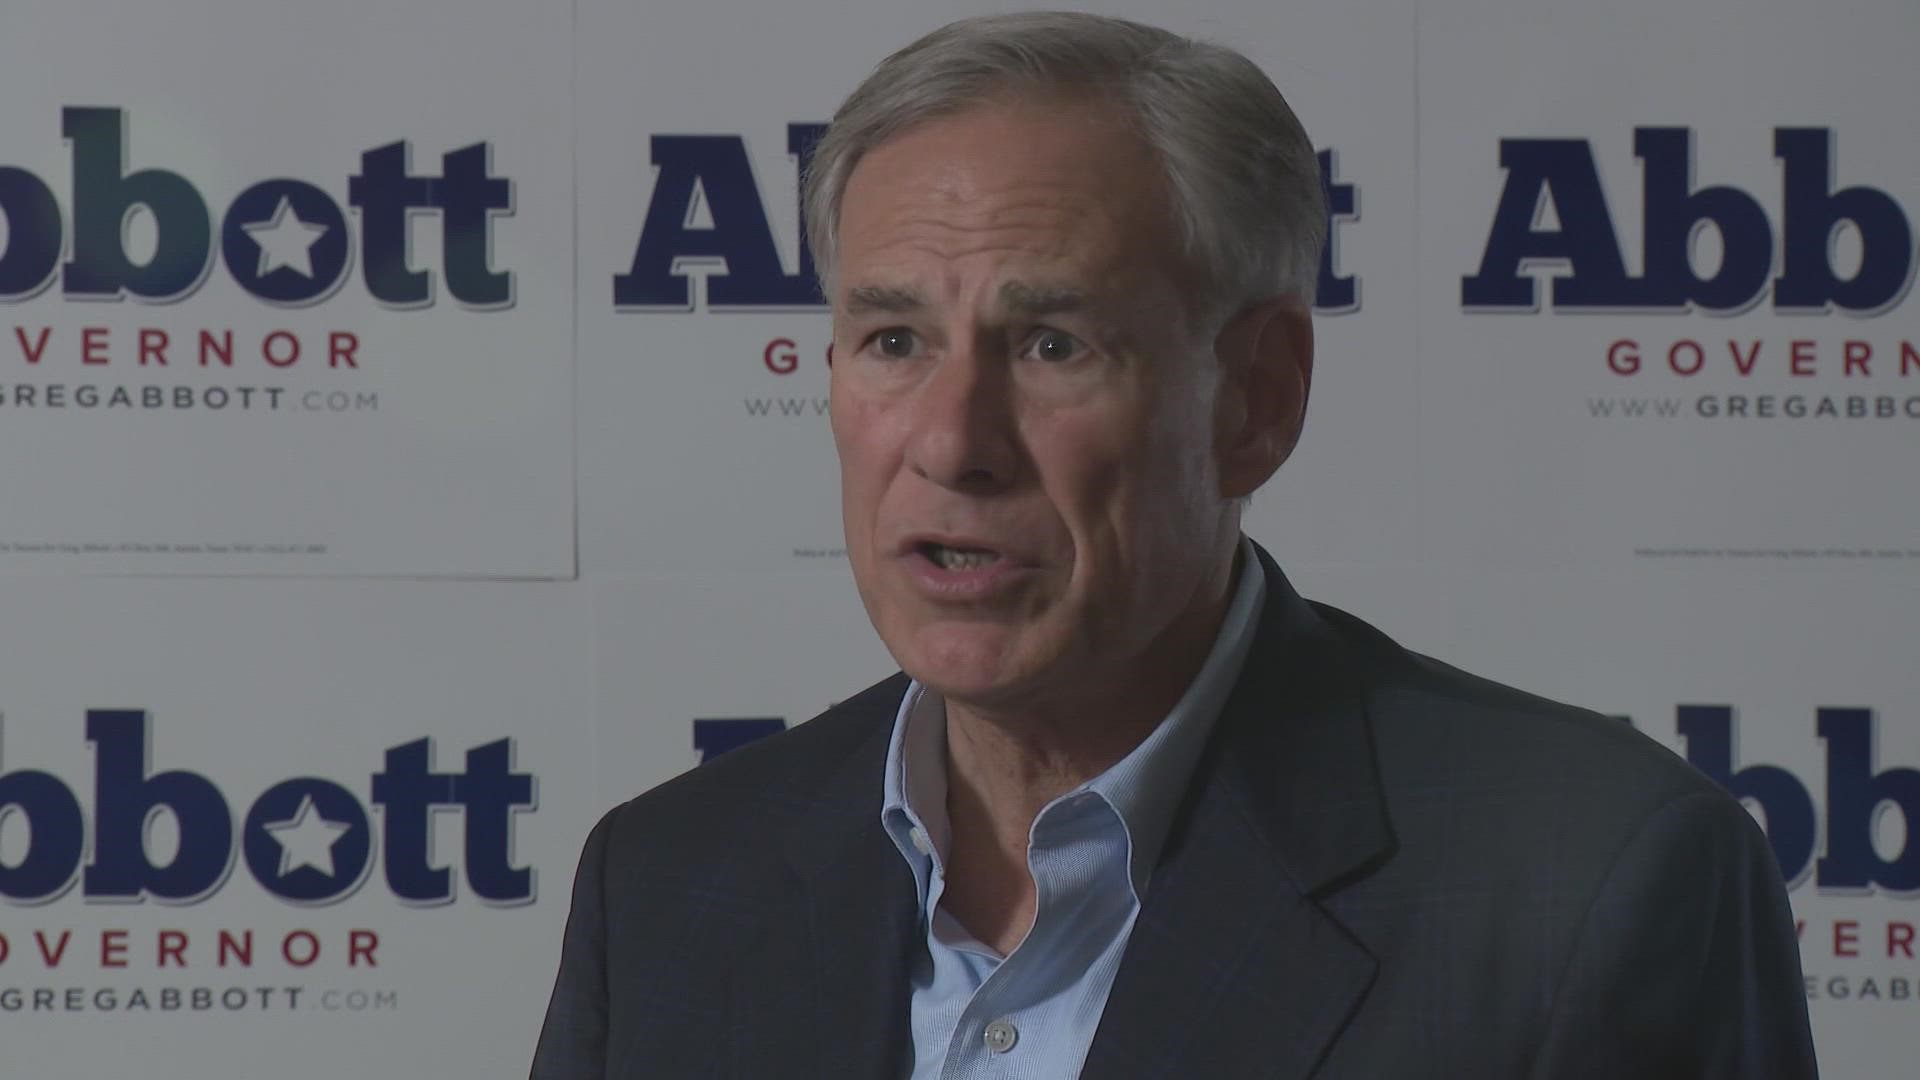 Len Cannon sat down with Gov. Greg Abbott for an exclusive interview during his visit to Houston on Tuesday, Sept. 13 for his campaign.